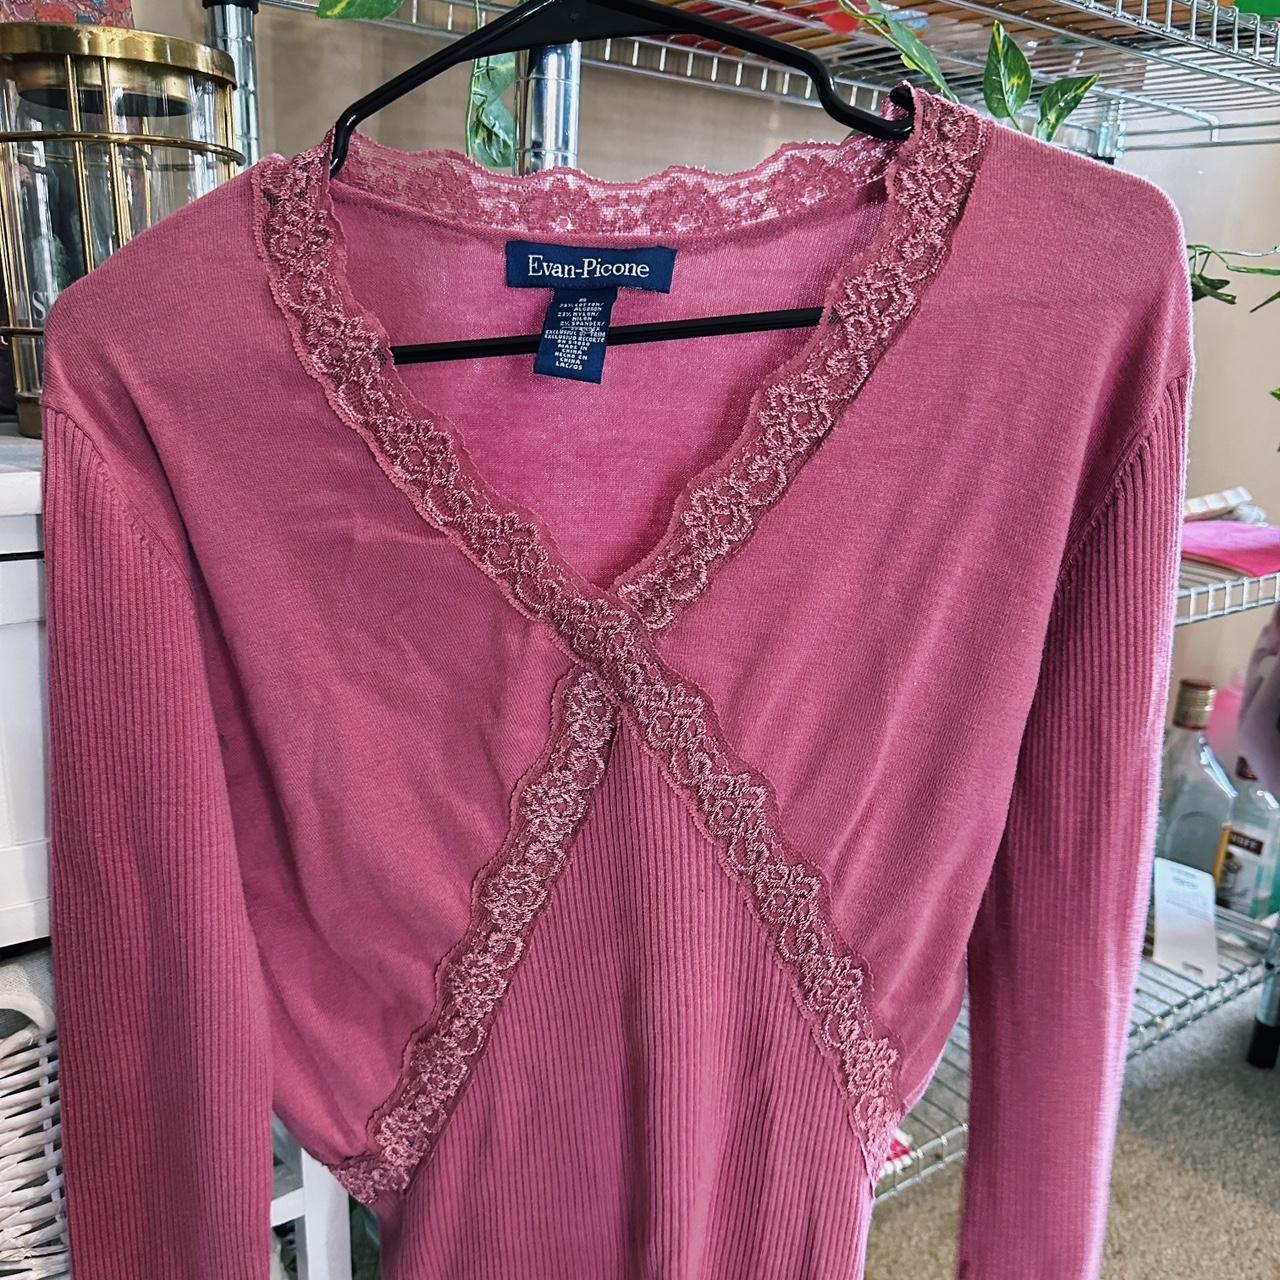 Pink Evan Picone blouse 💕🌸 Size small but fits like... - Depop